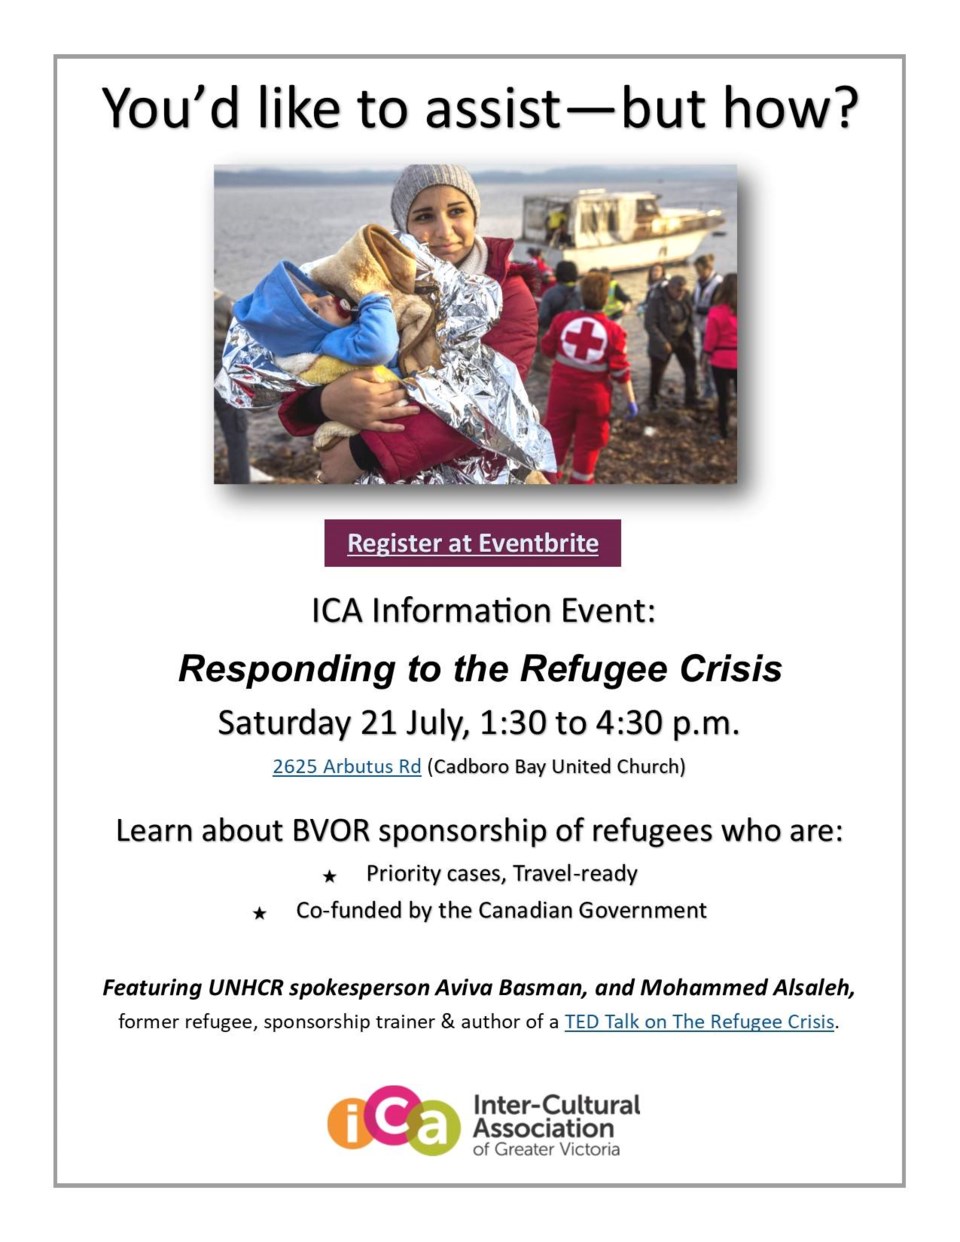 Lots to learn in helping victims of refugee crisis